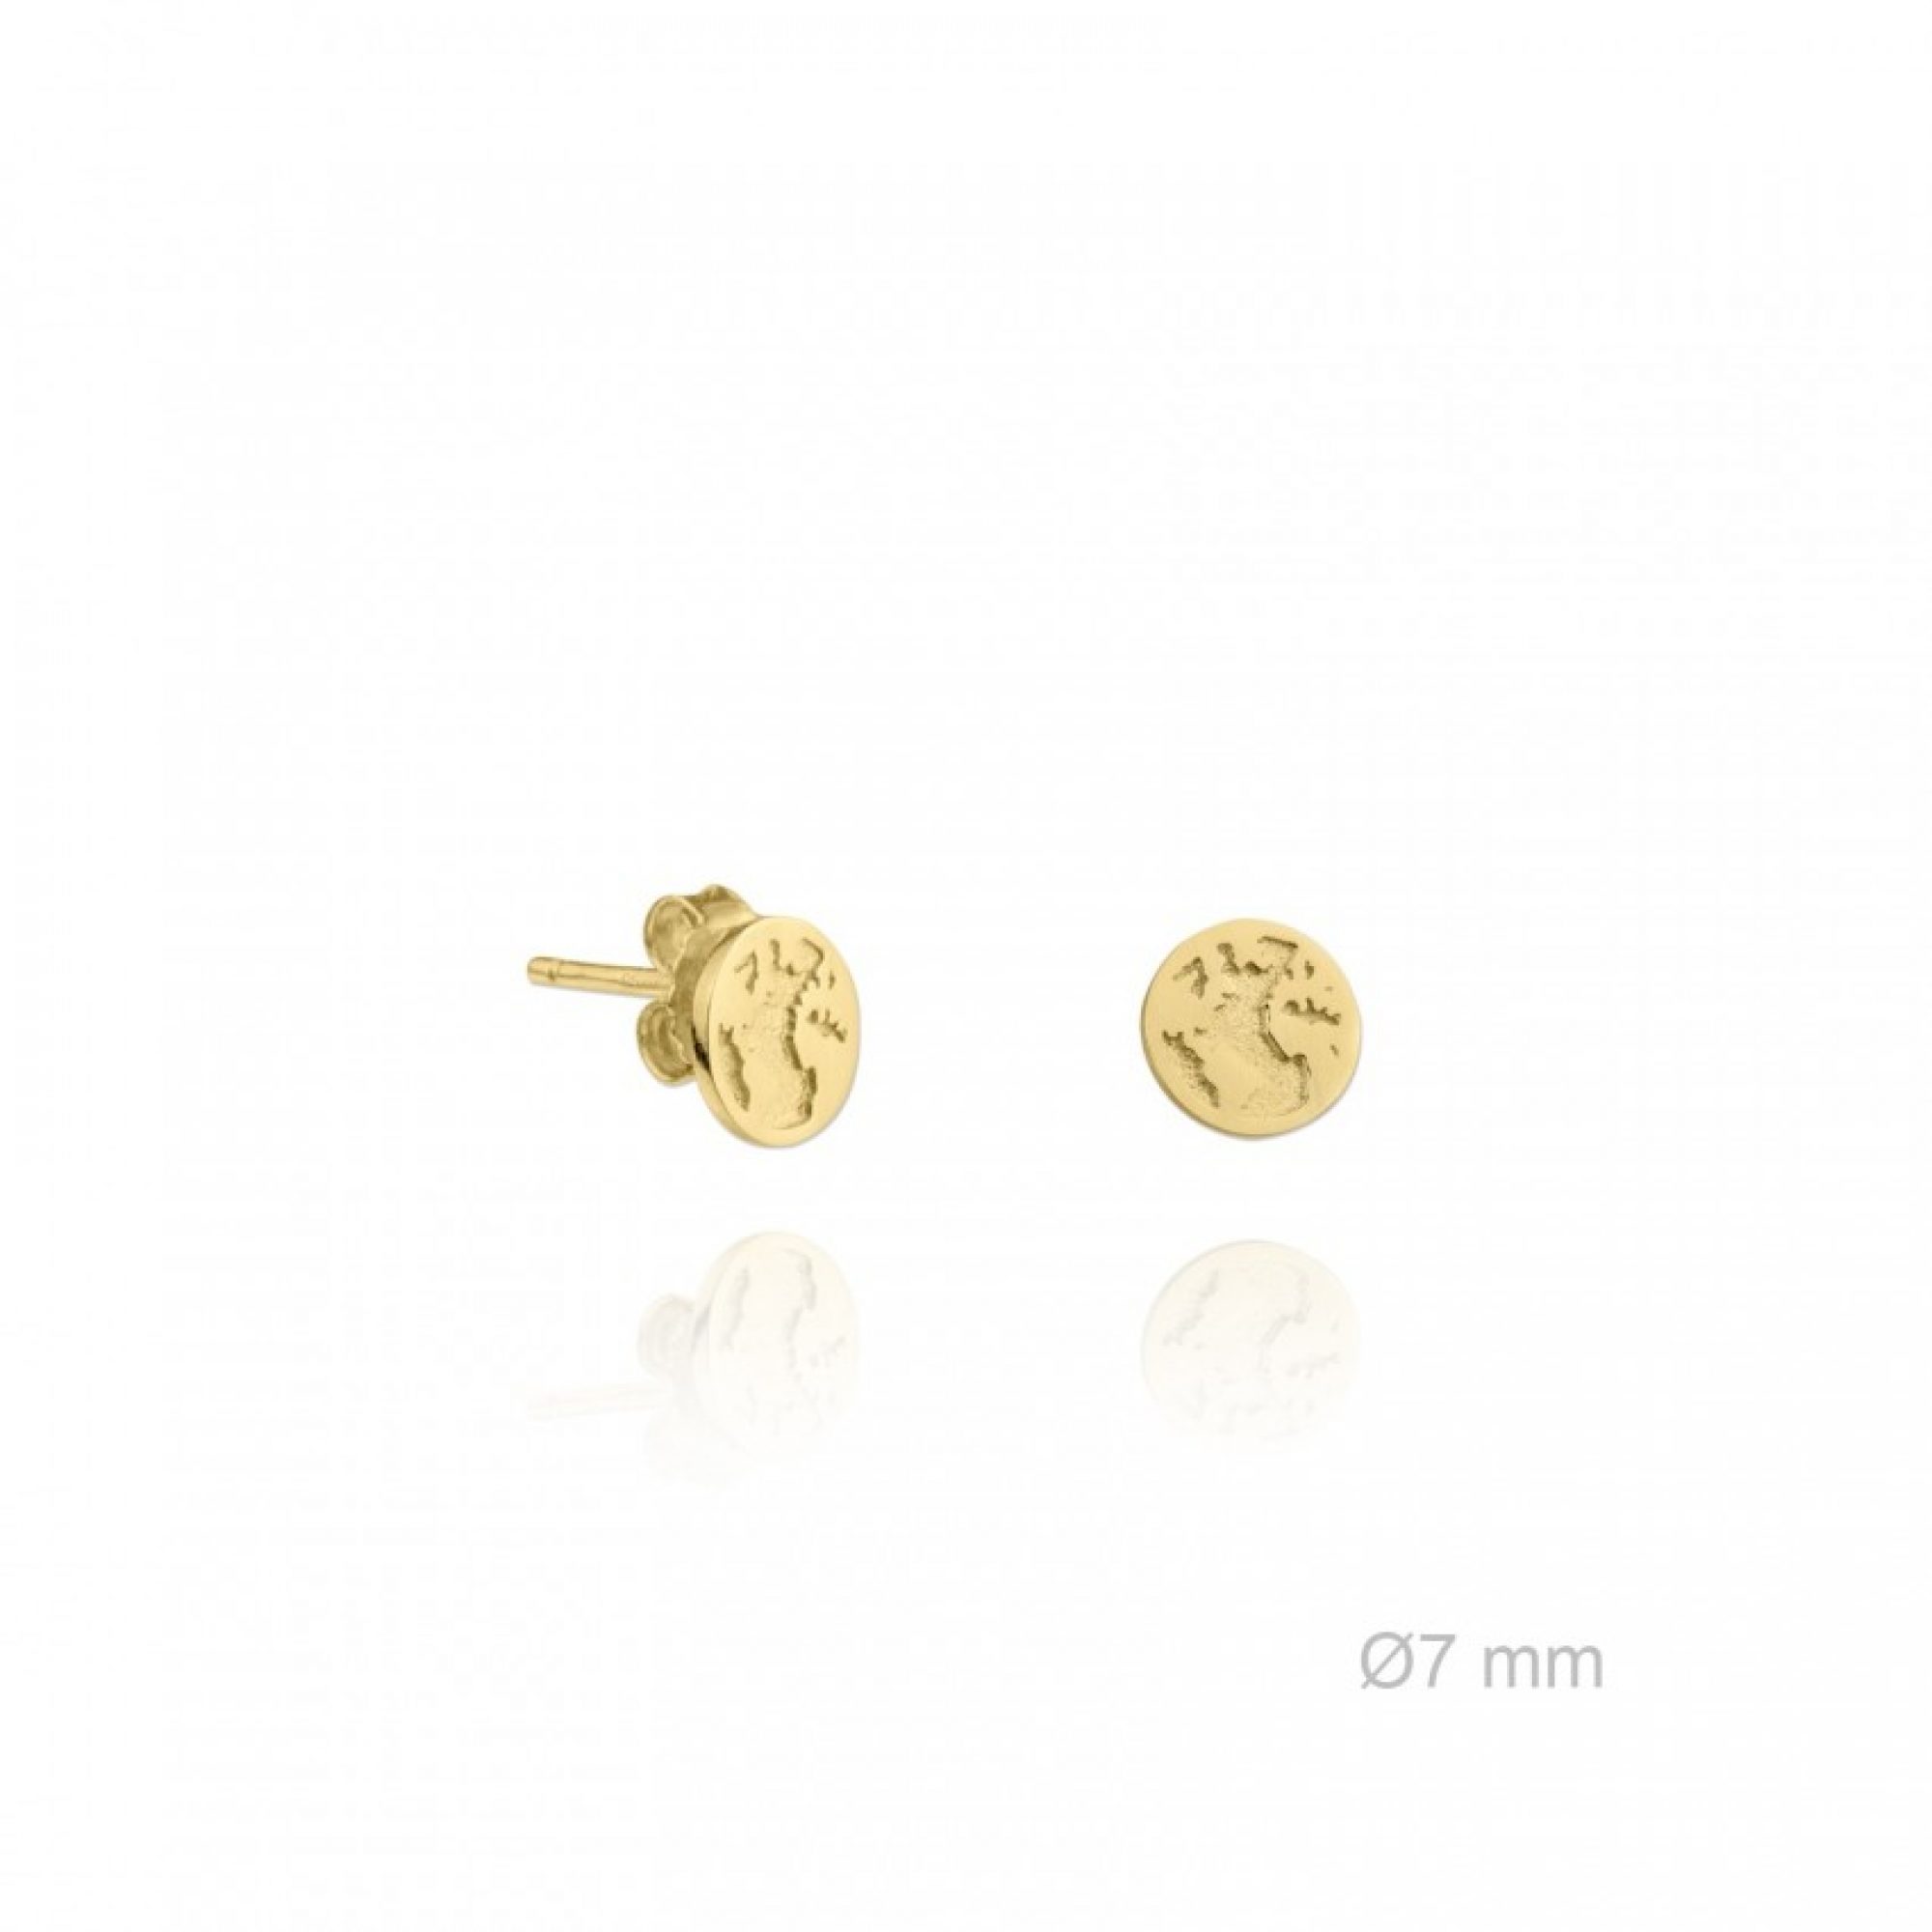 Gold plated earrings with the world map